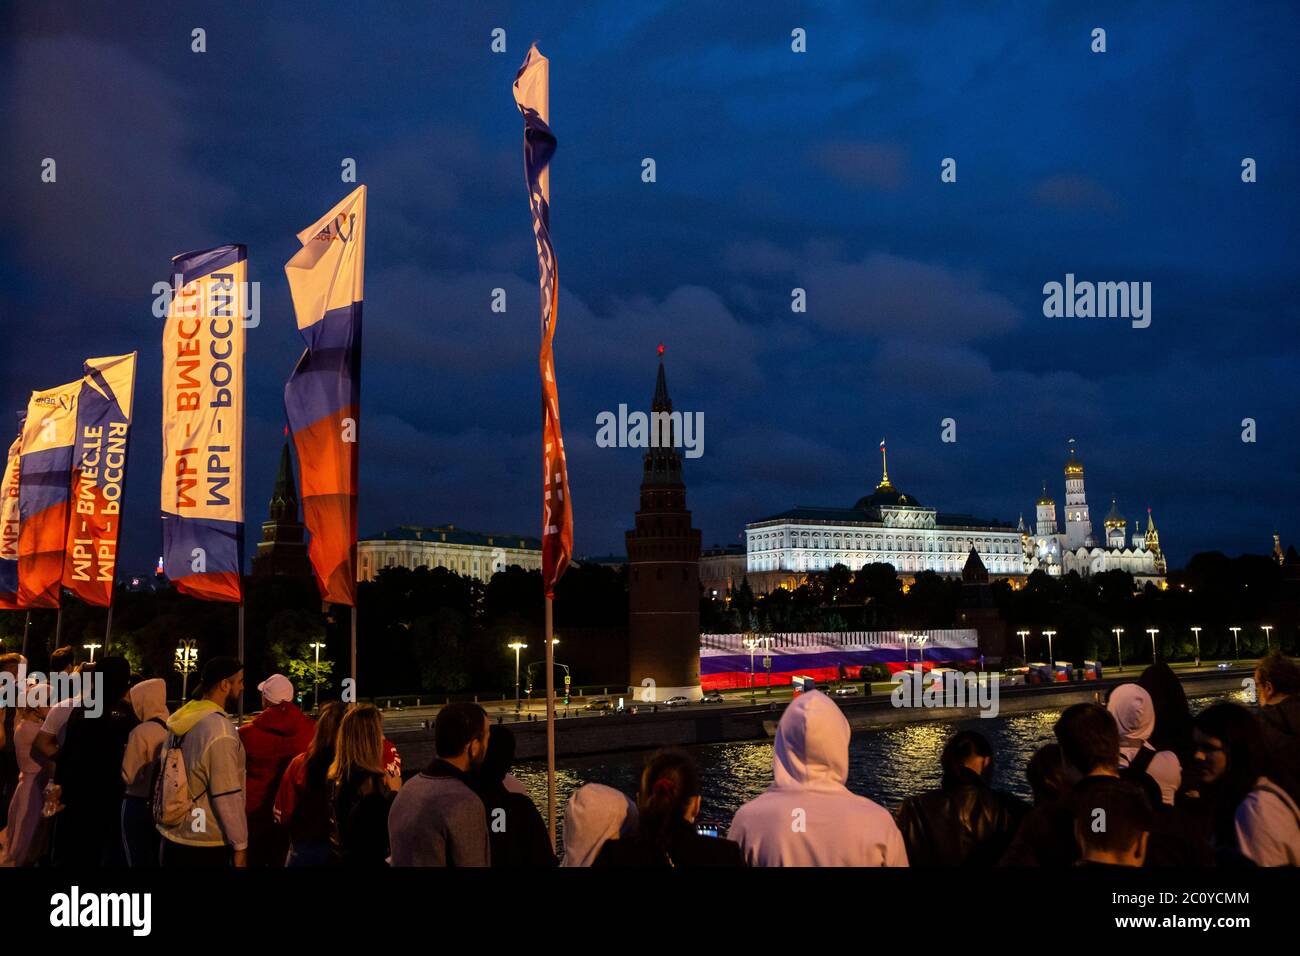 Moscow, Russia. 12th June, 2020. People watch Russian national flag projected on the Kremlin wall to celebrate Russia day in Moscow, Russia, on June 12, 2020. Credit: Alexander Zemlianichenko Jr/Xinhua/Alamy Live News Stock Photo